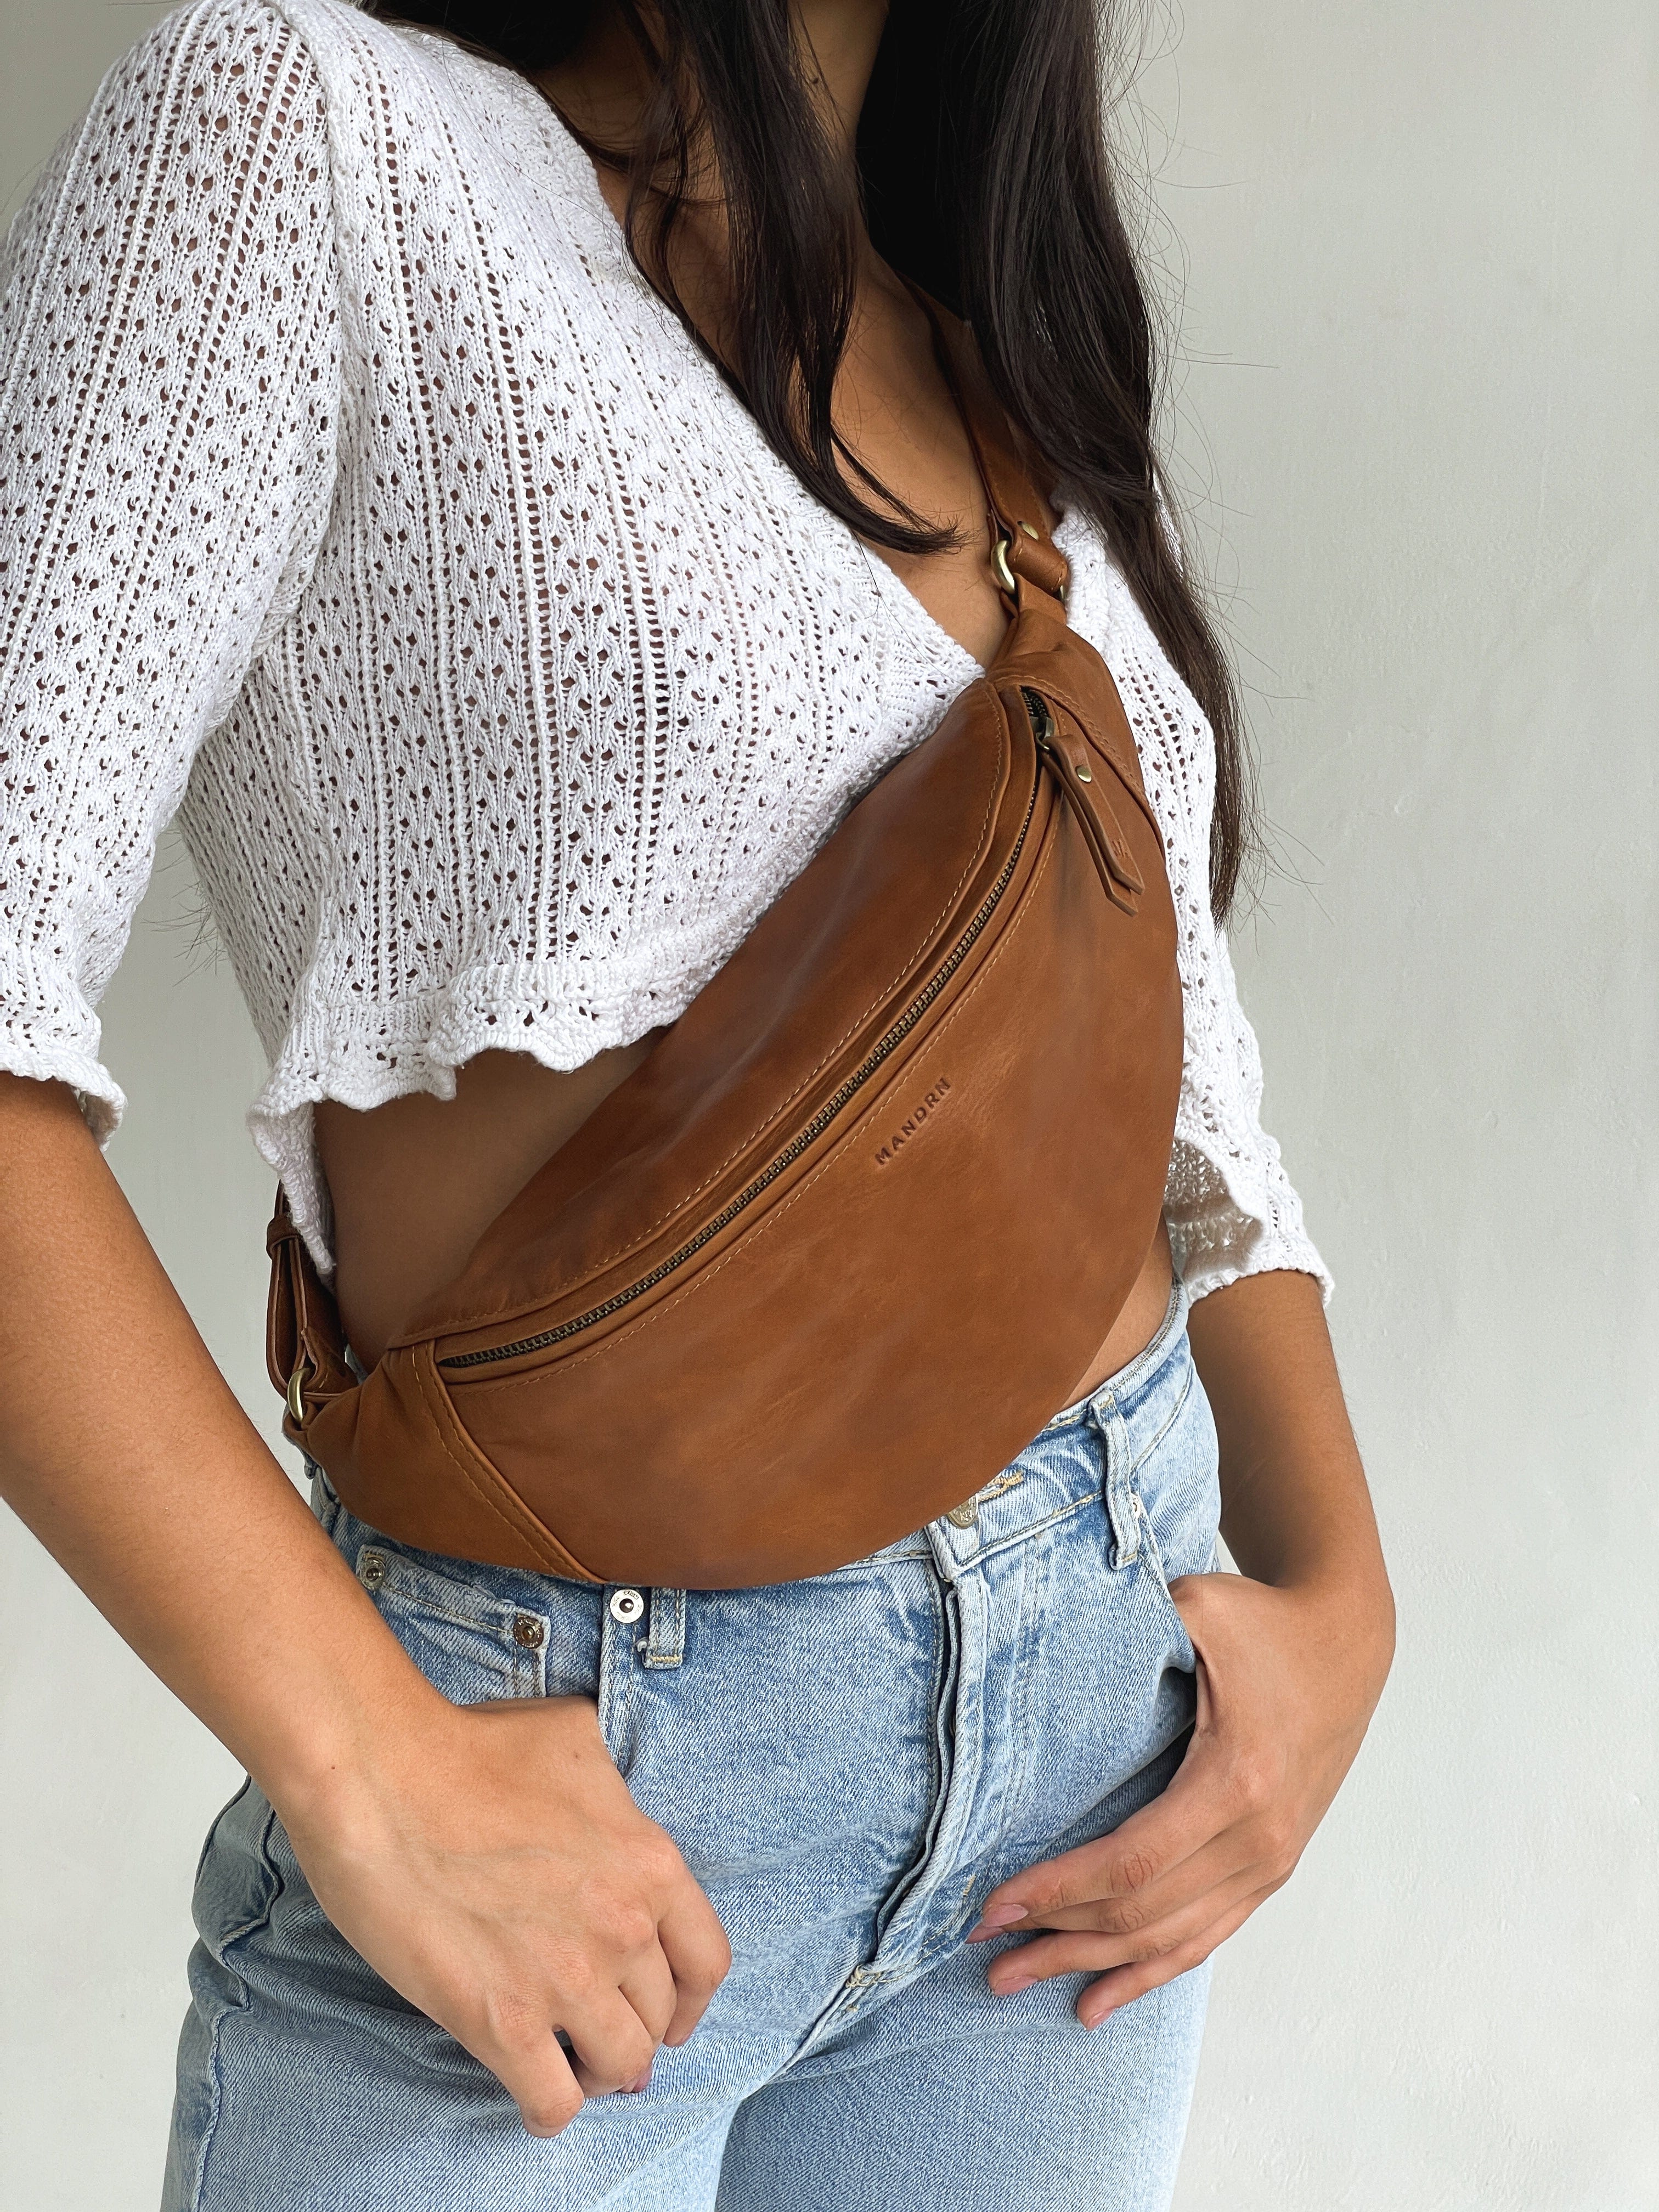 MANDRN | The Atlas- Tan Leather Fanny Pack